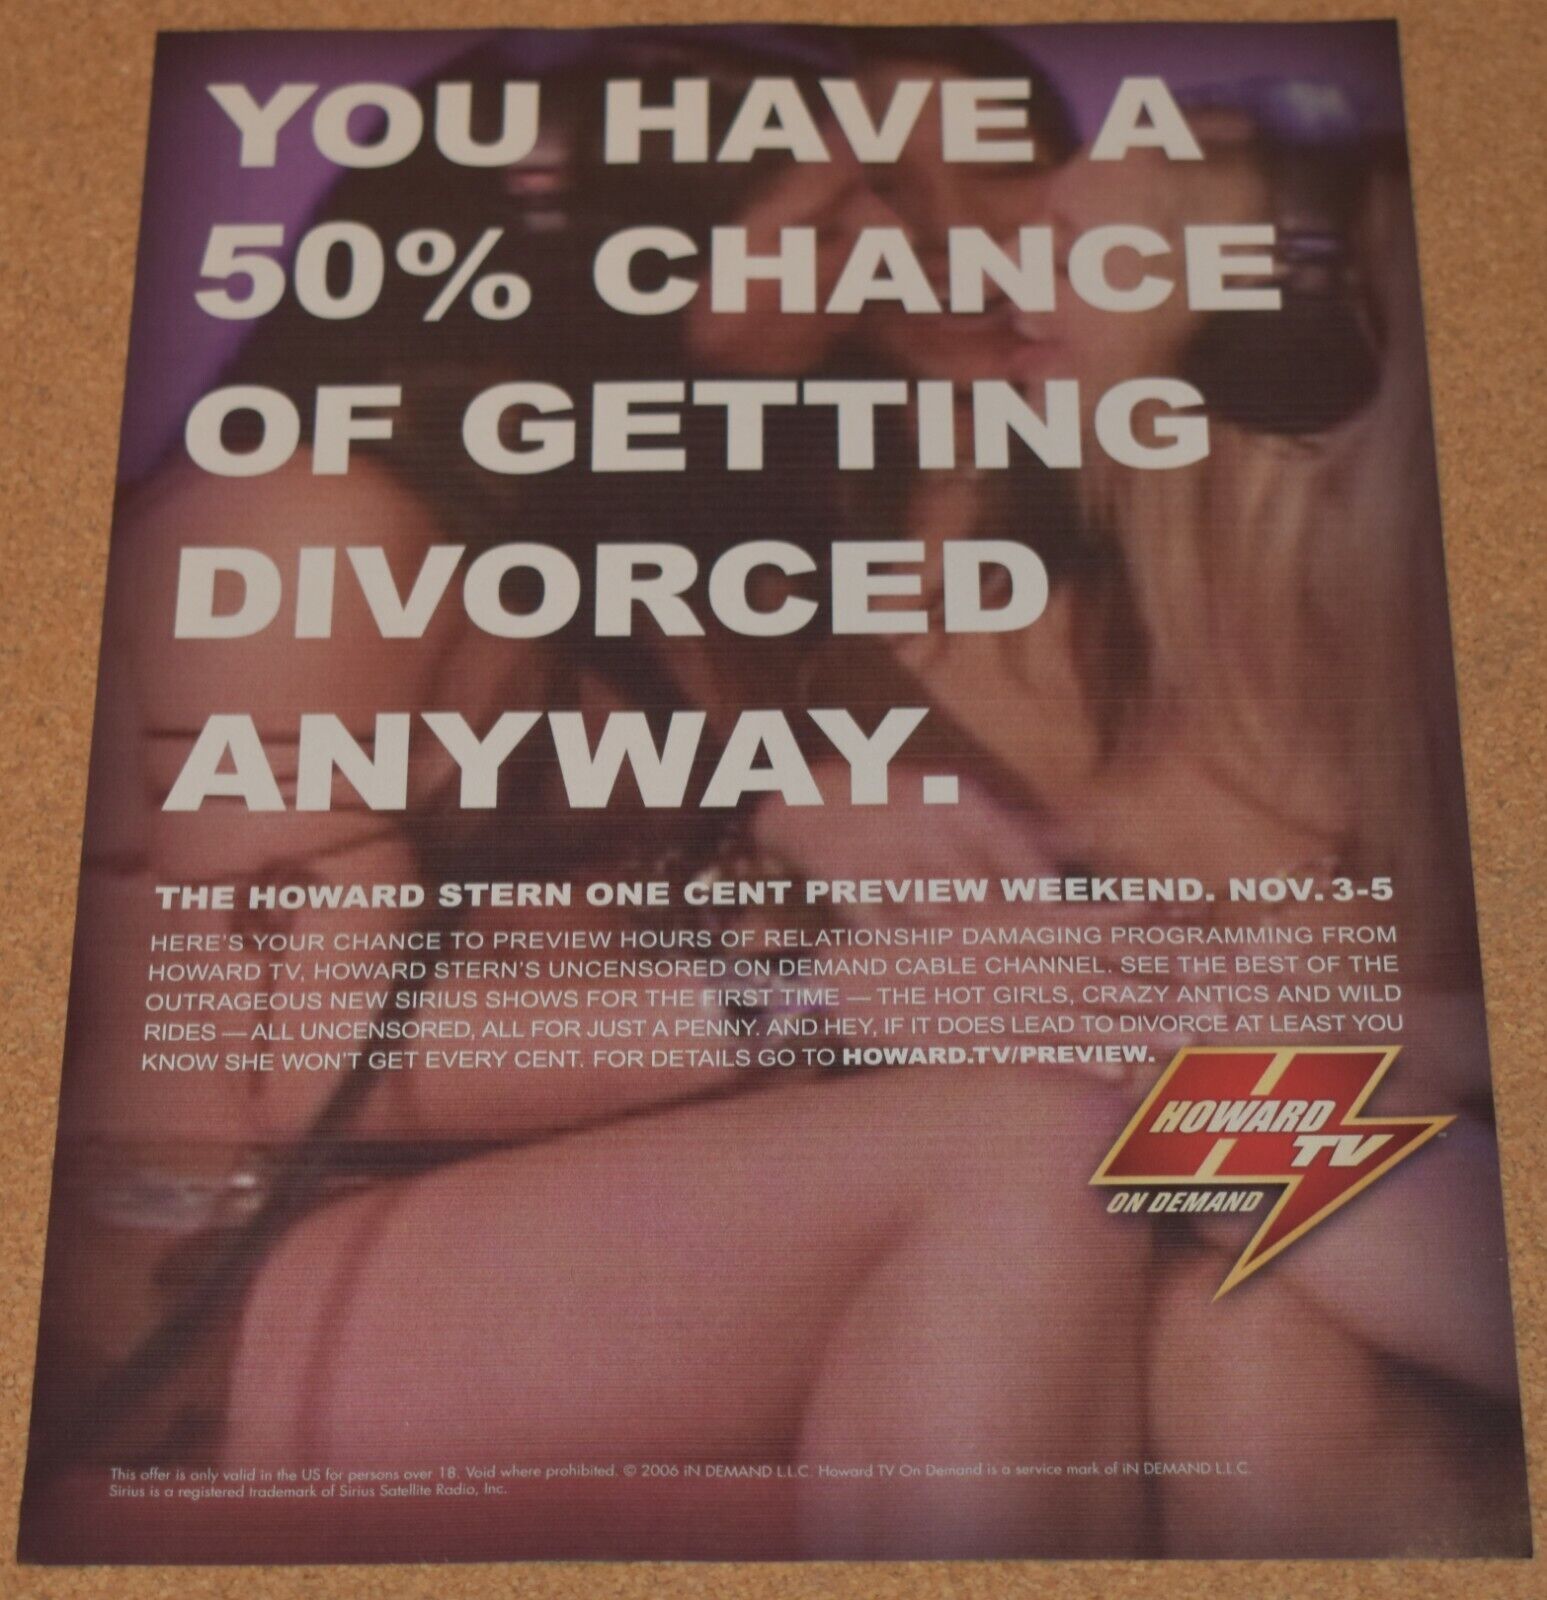 2006 Print Ad Howard Stern on Demand TV 50% chance of getting divorced anyway eBay